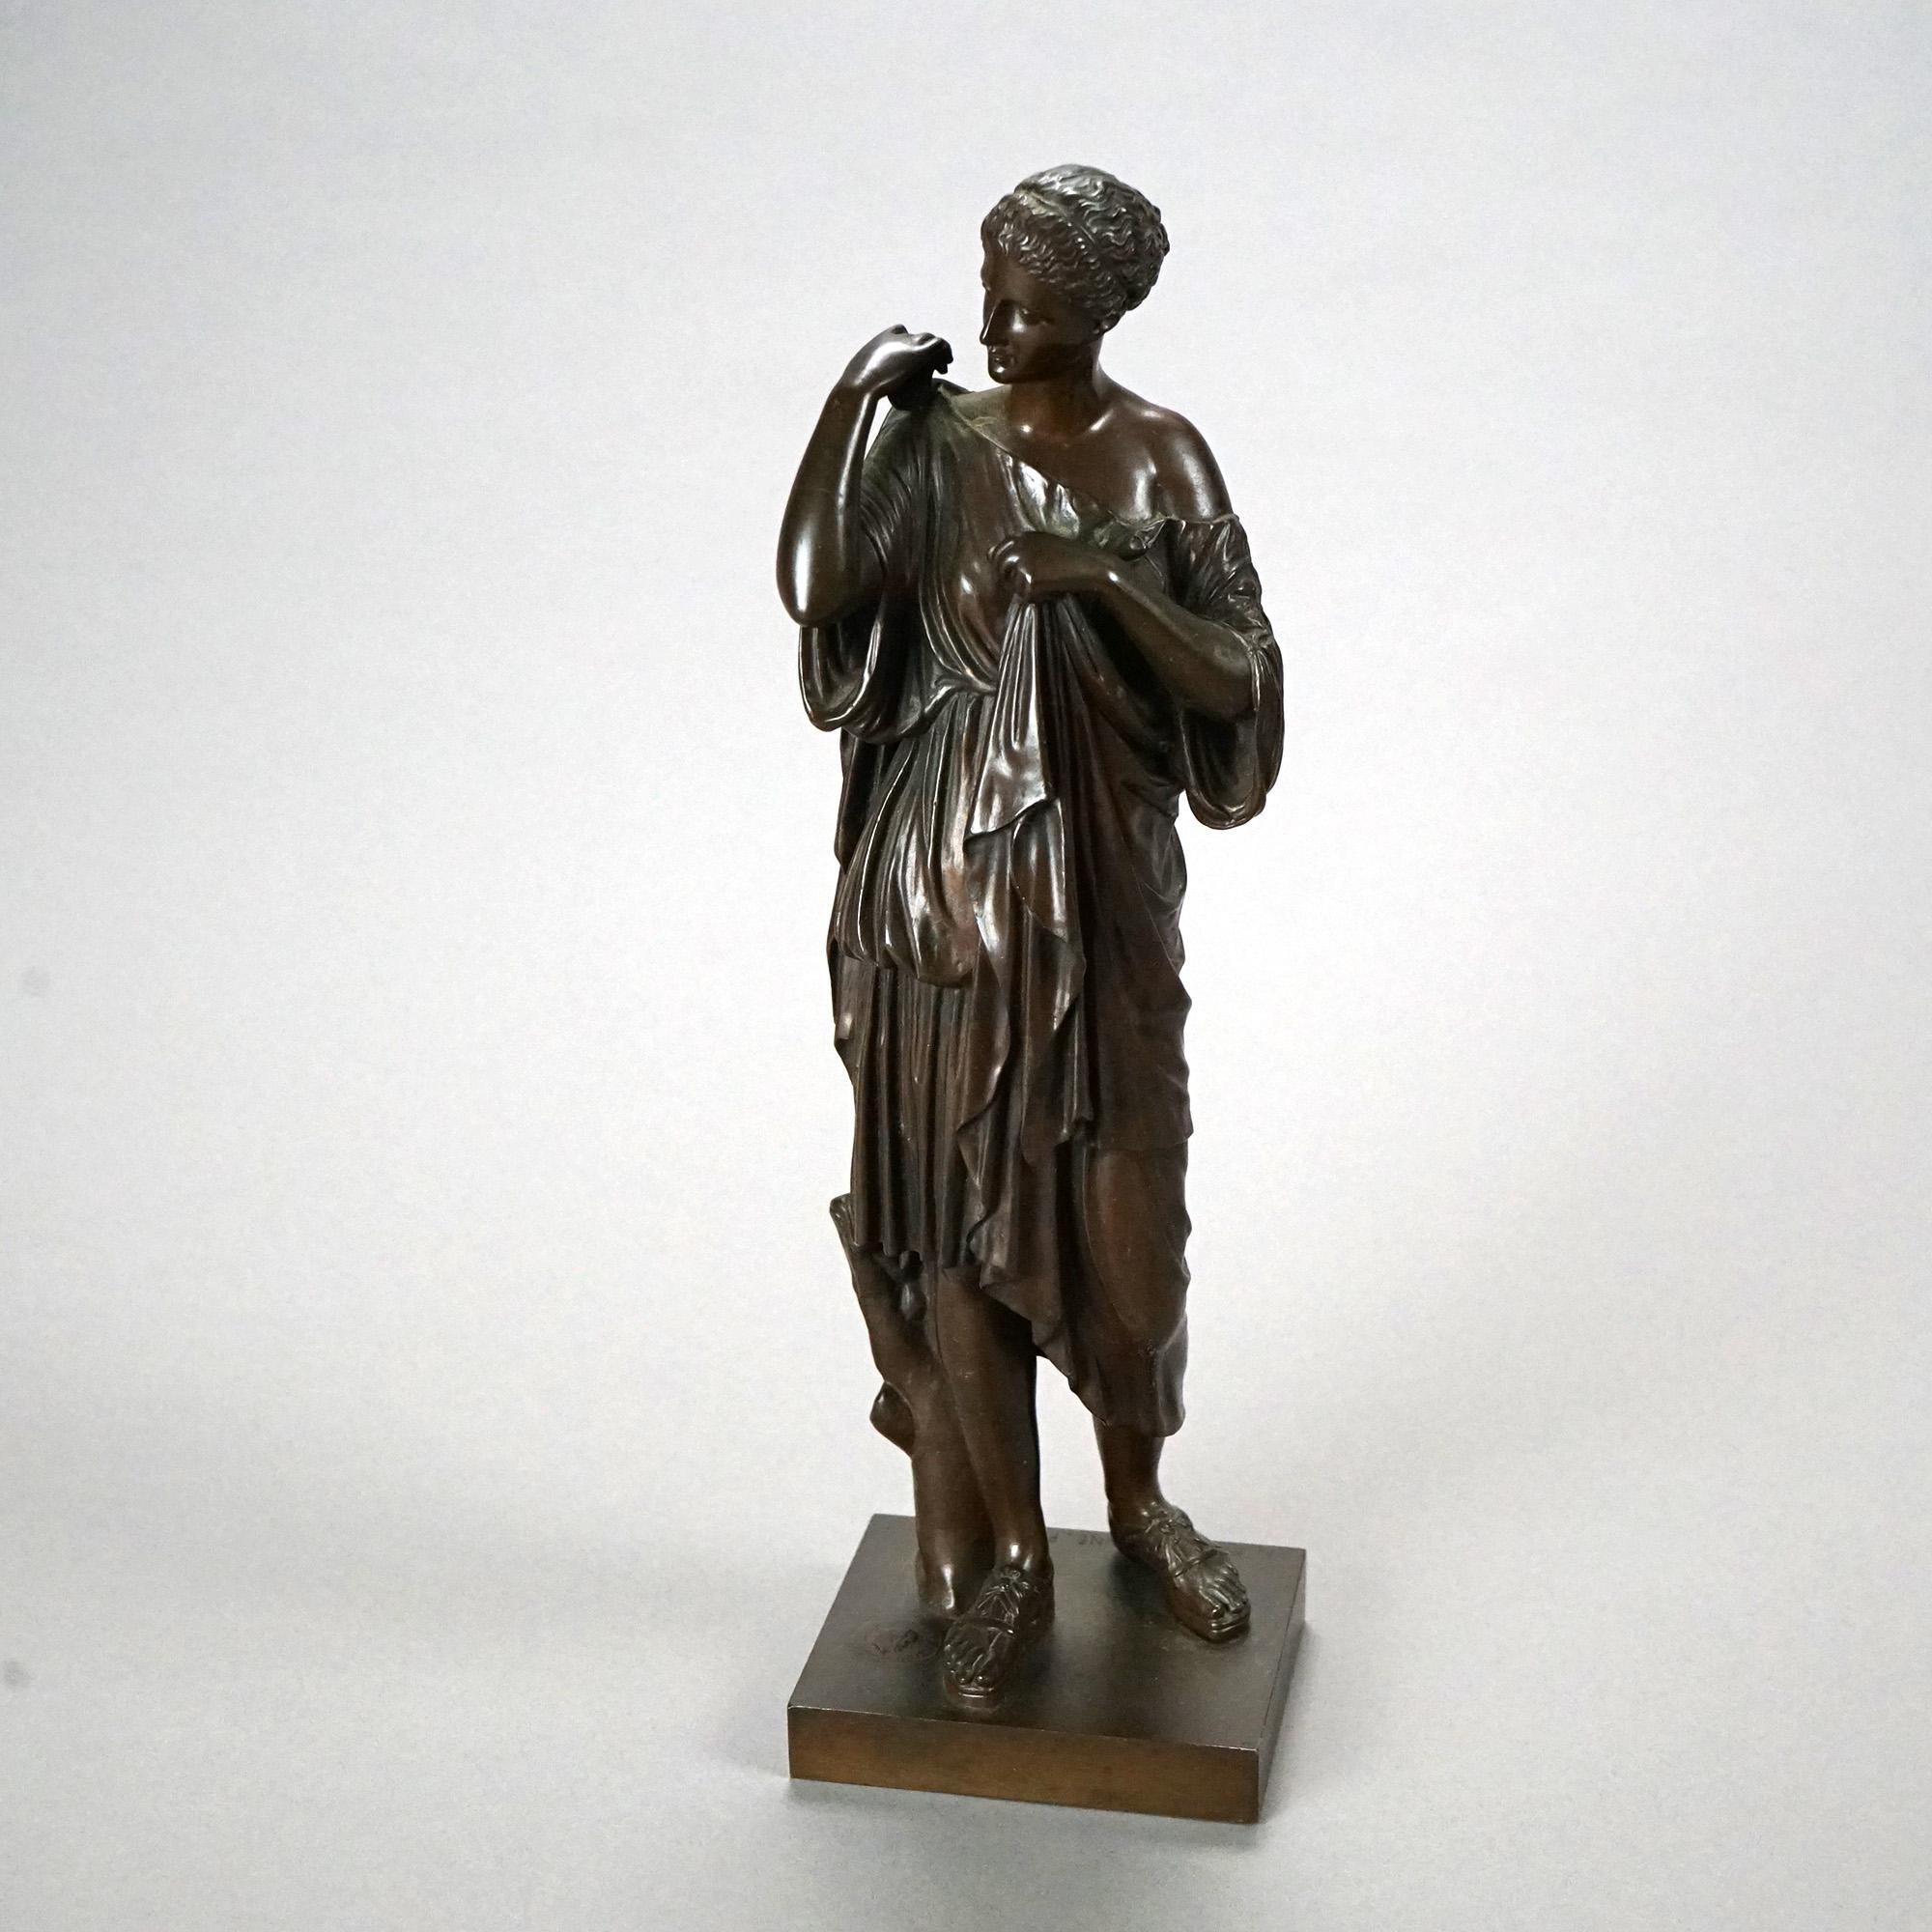 An antique French cast bronze portrait sculpture of a Classical woman, inscribed 